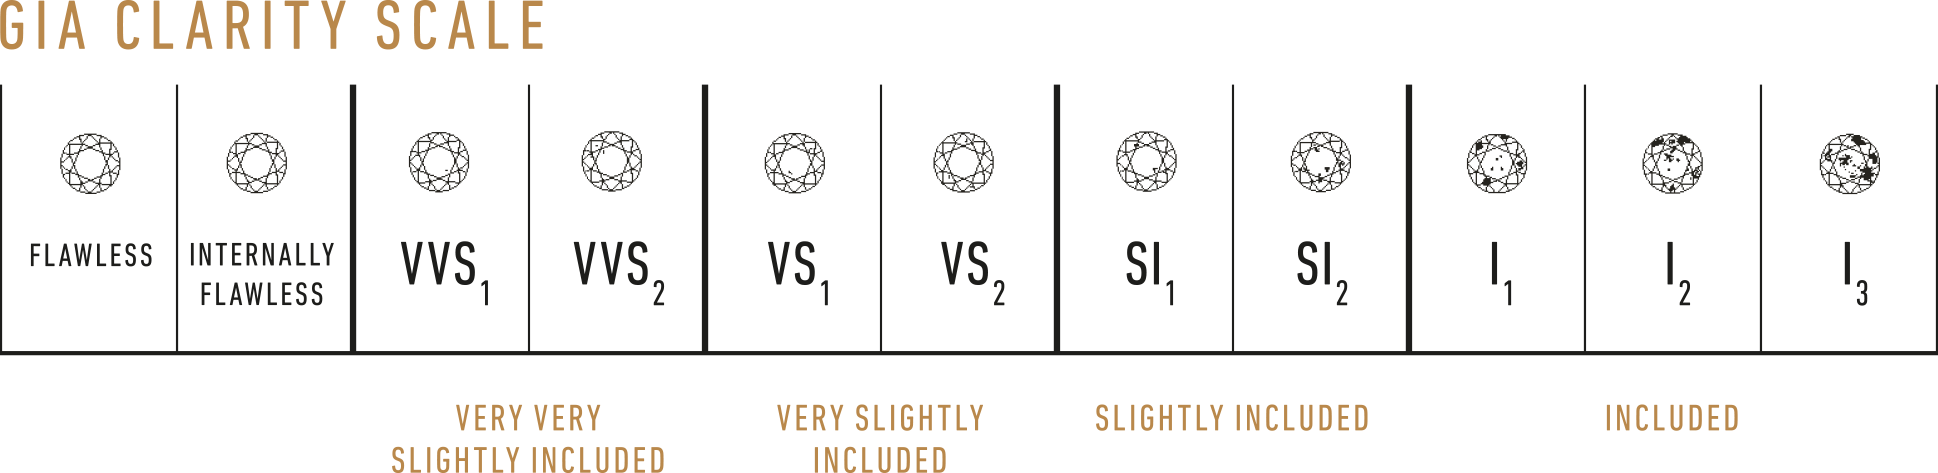 GIA Clarity Scale